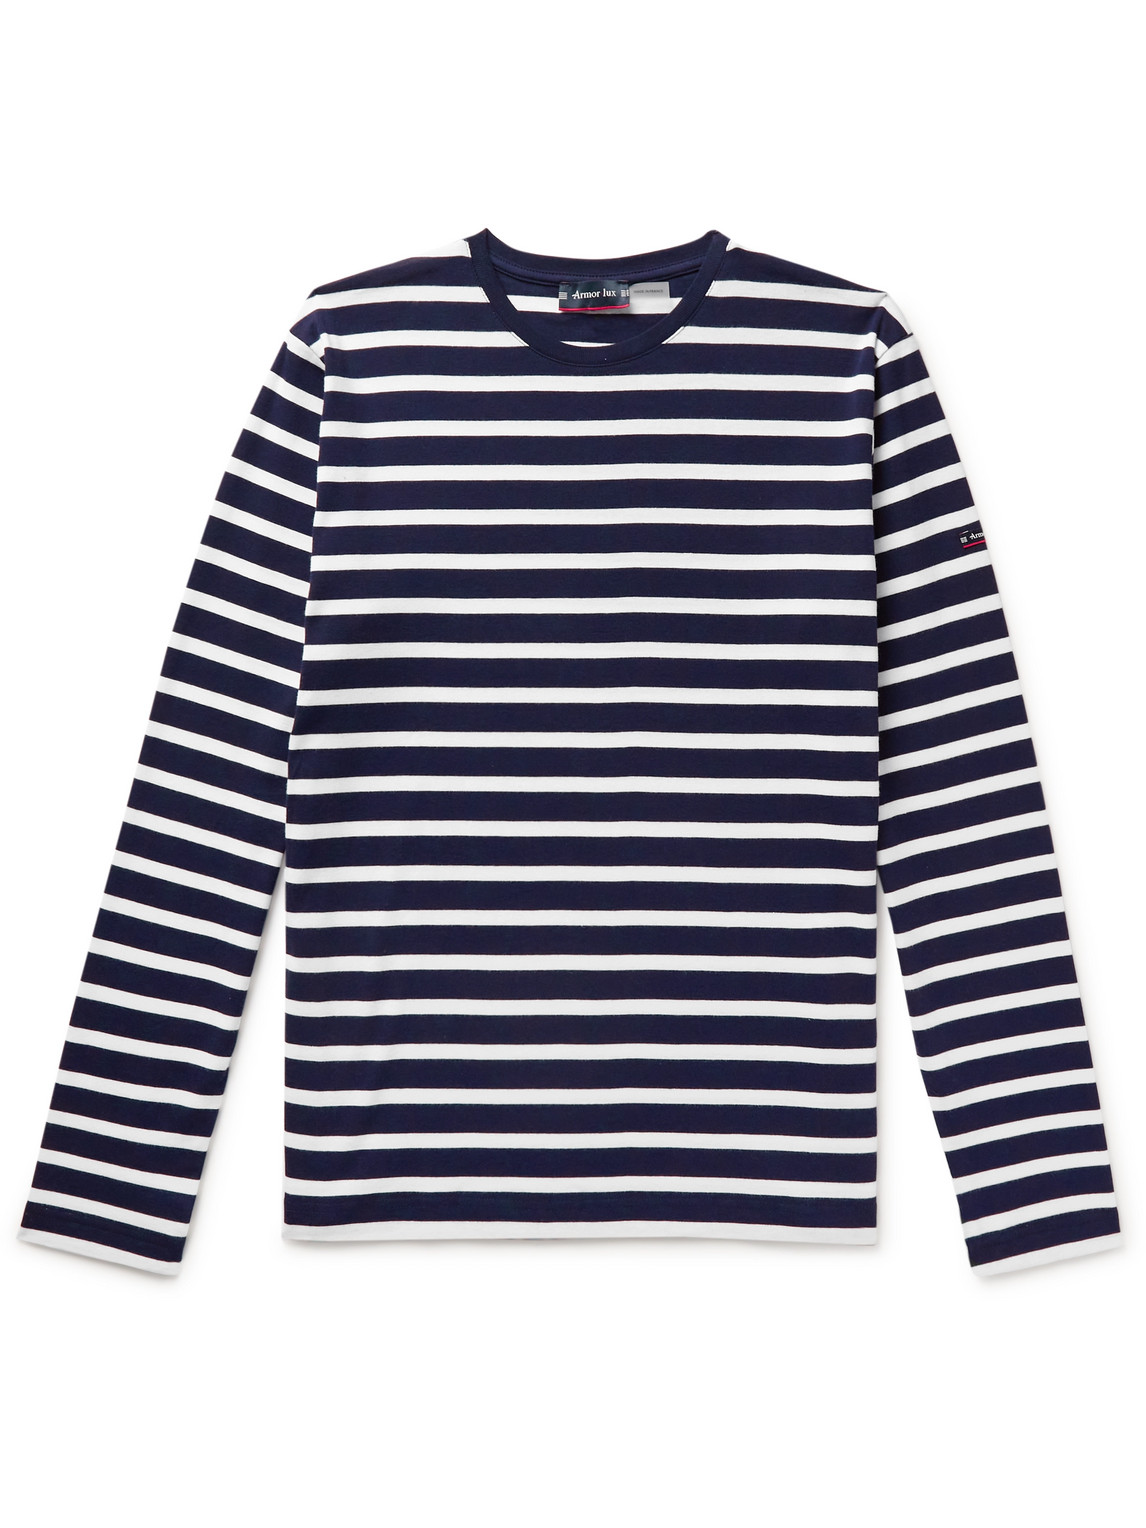 Armor-lux Slim-fit Striped Cotton-jersey T-shirt In Blue | ModeSens